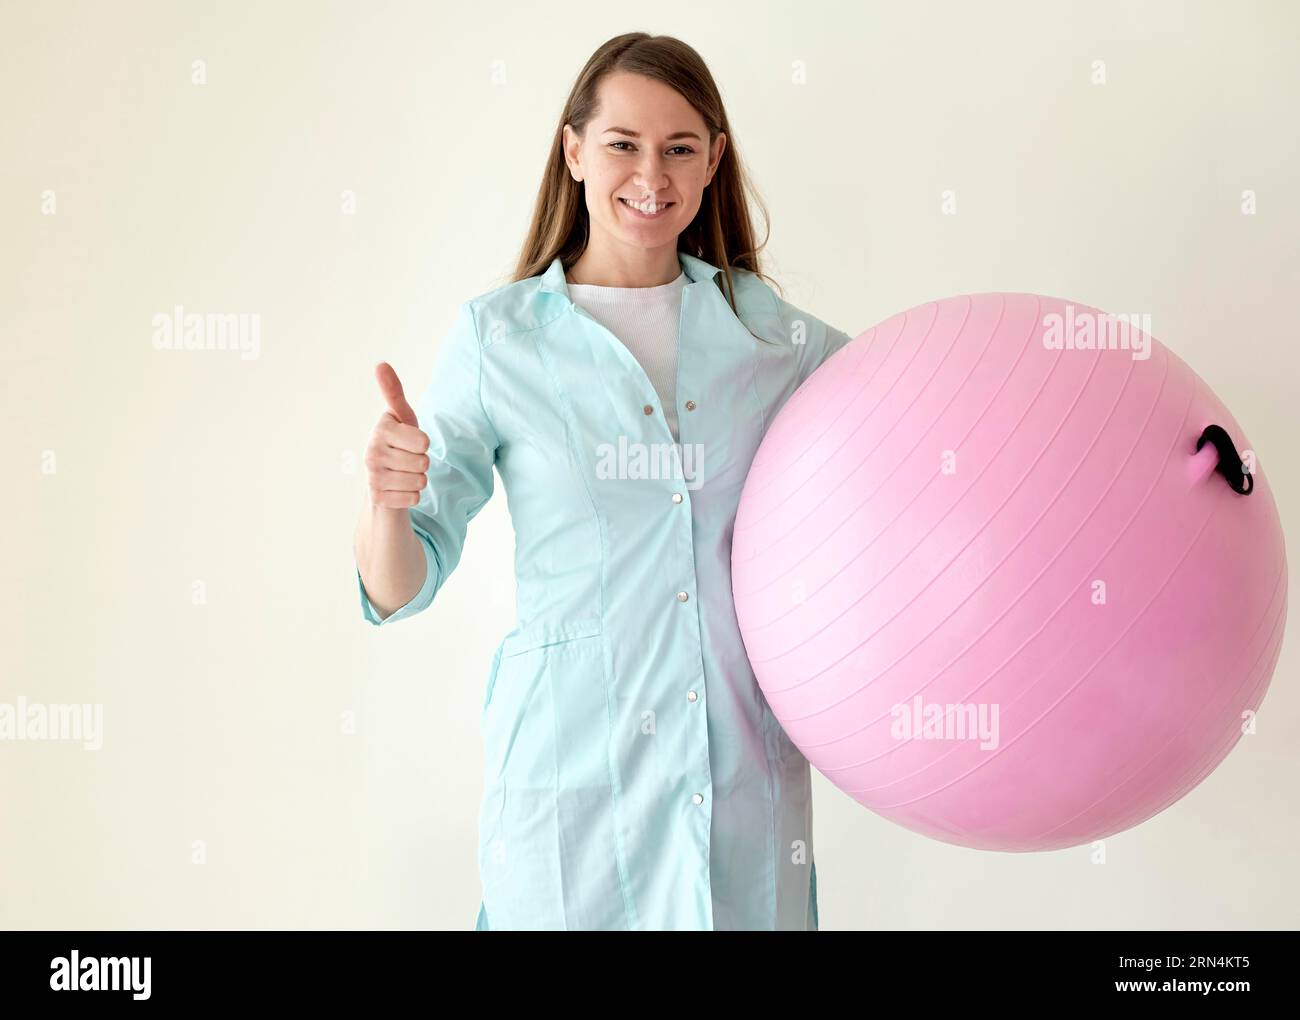 Smiley physiotherapist holding exercise ball giving thumbs up Stock Photo